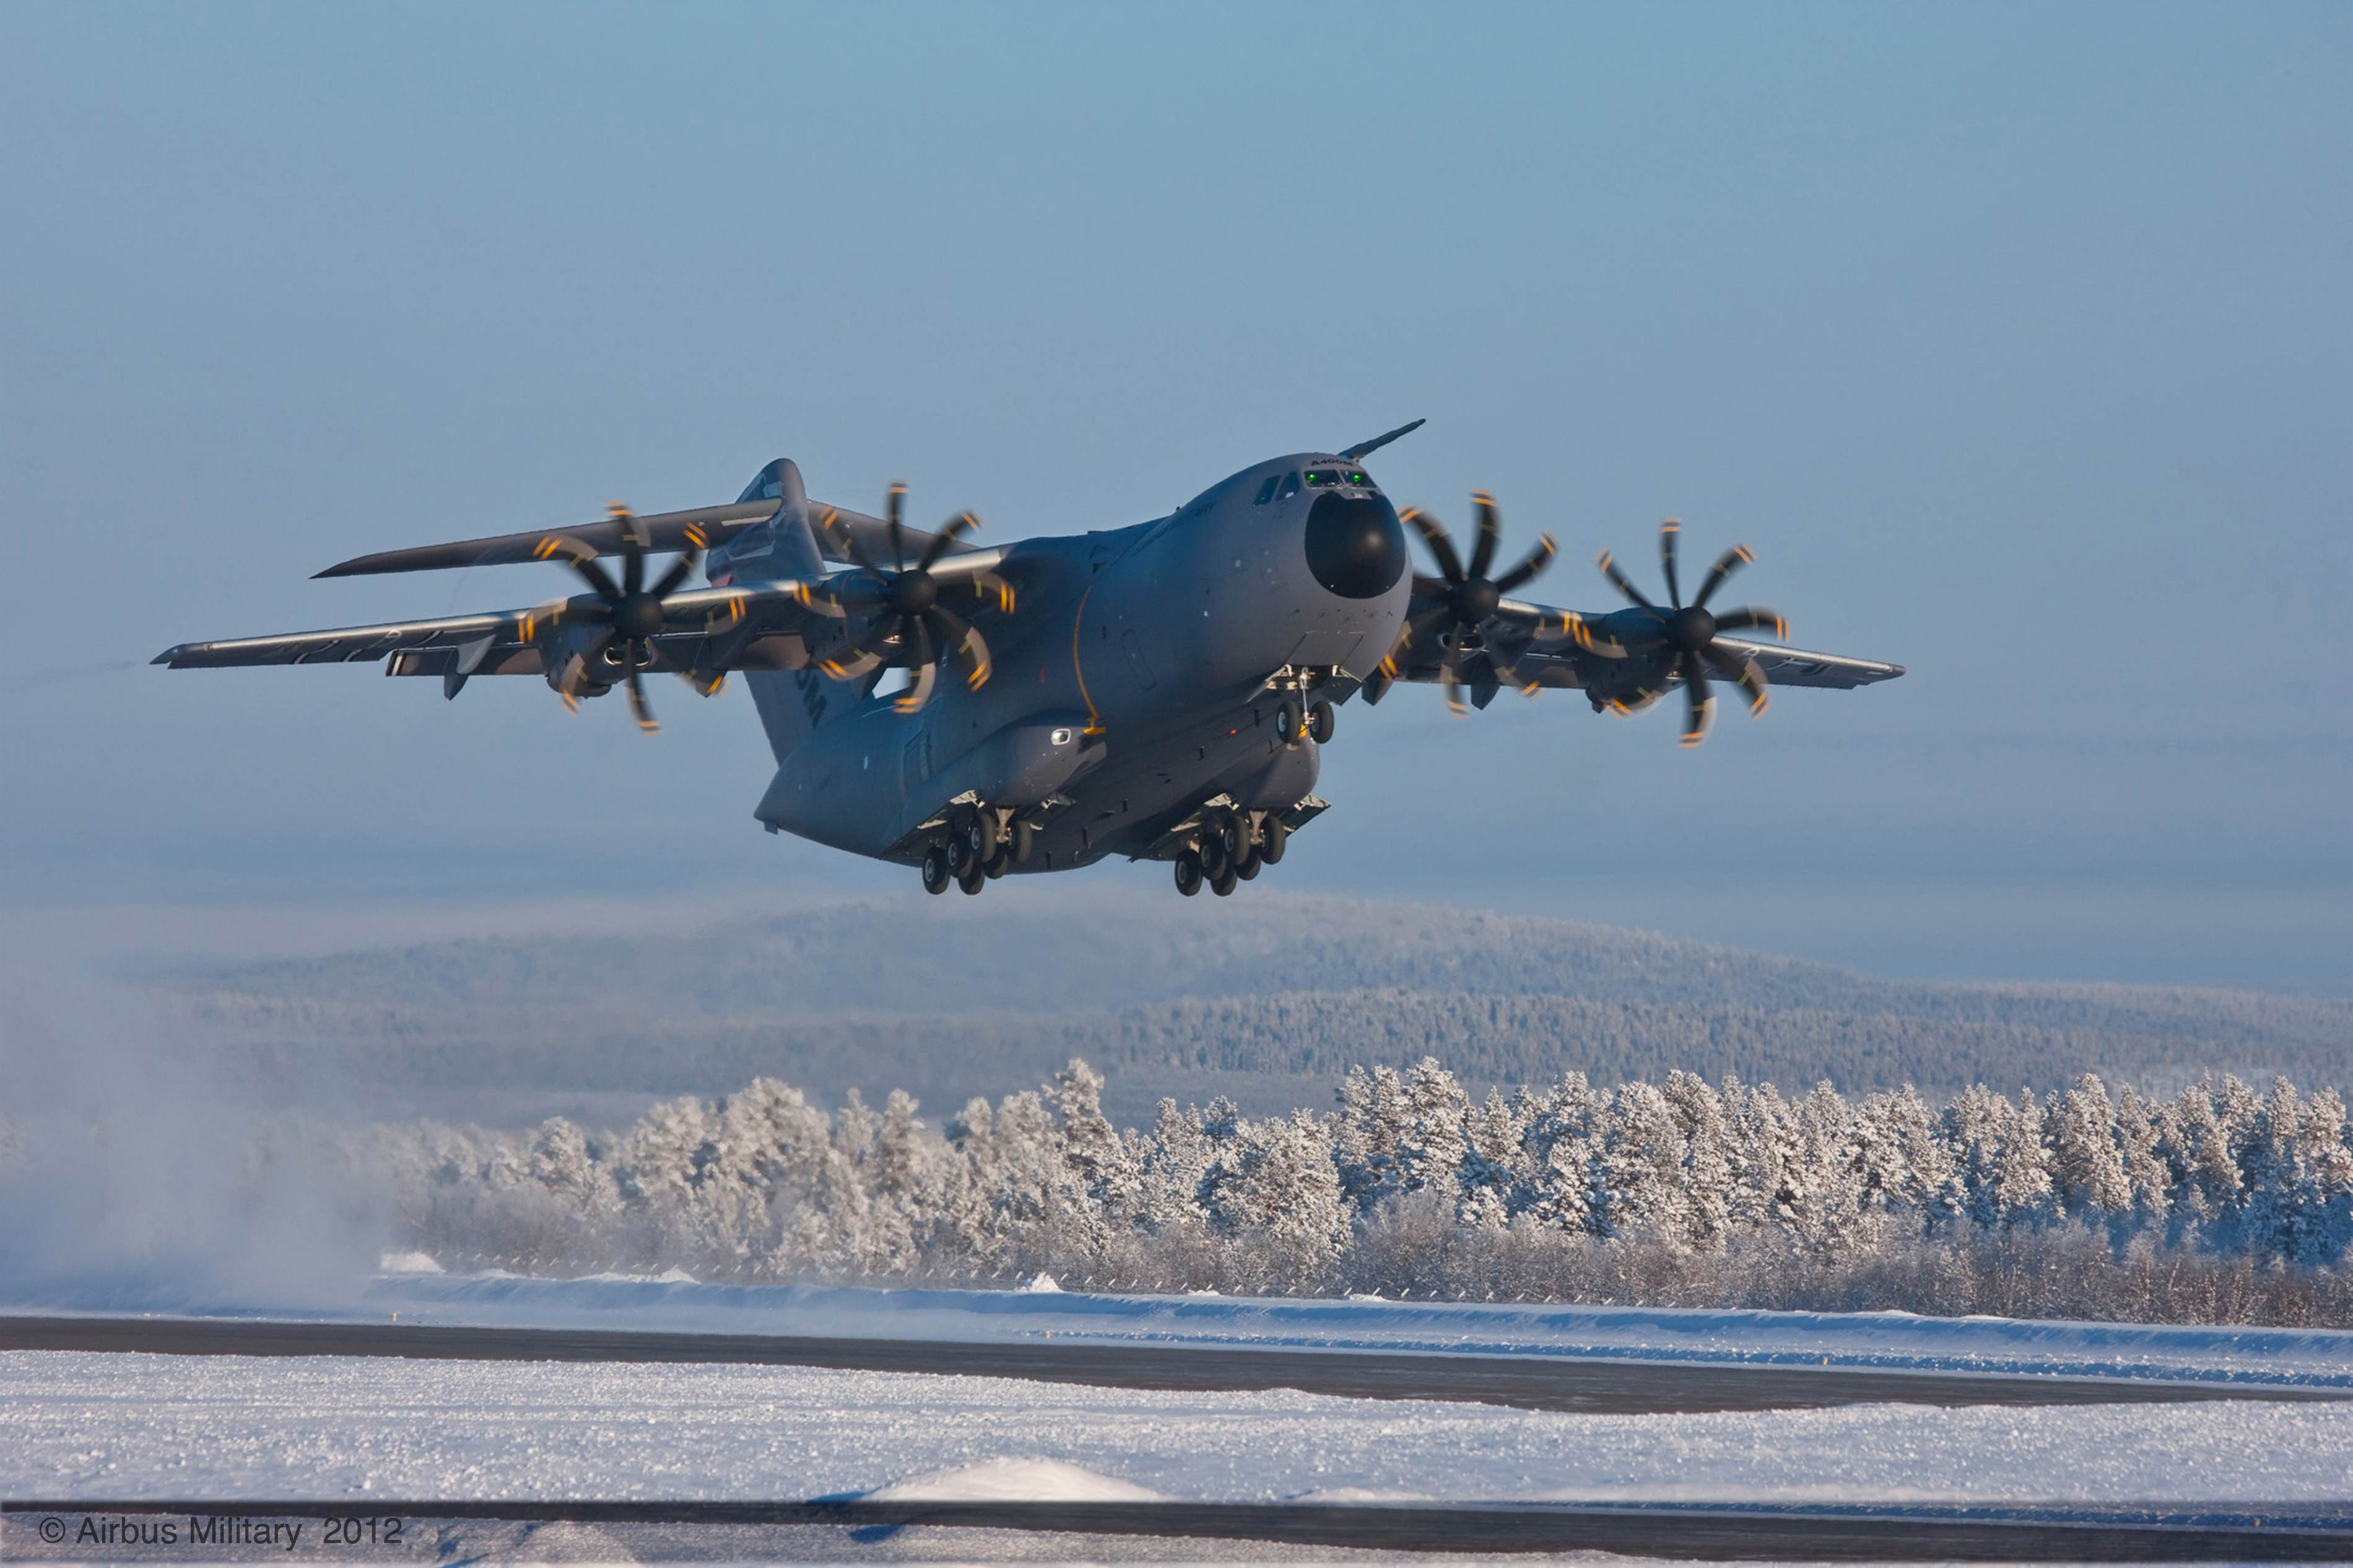 Airbus A400m Wallpaper And Background Image